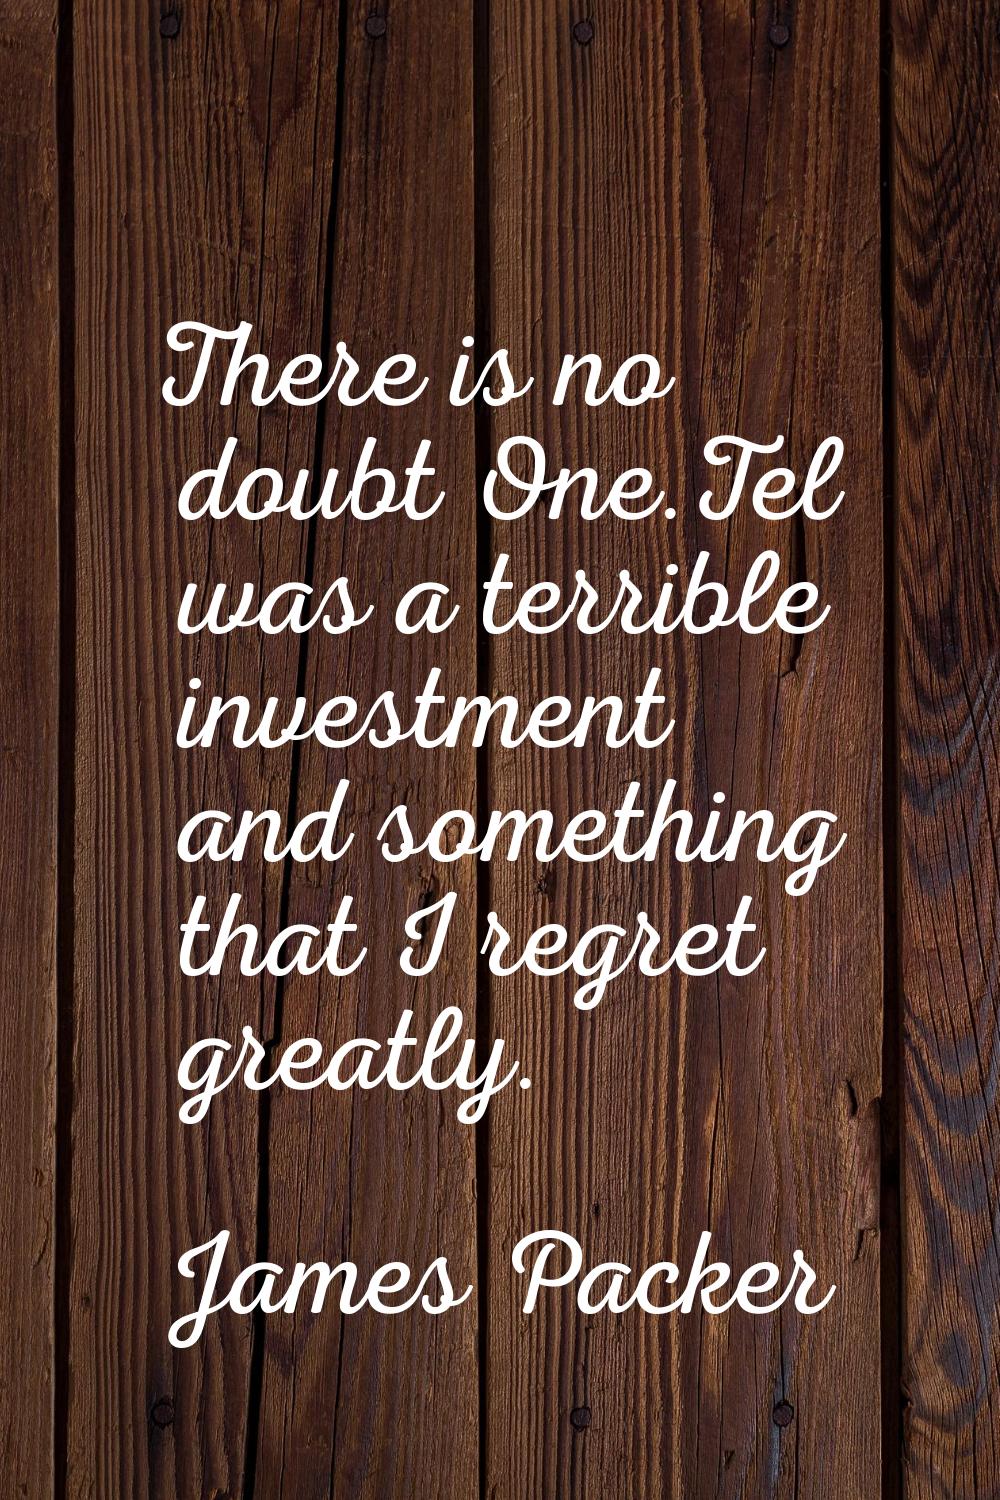 There is no doubt One.Tel was a terrible investment and something that I regret greatly.